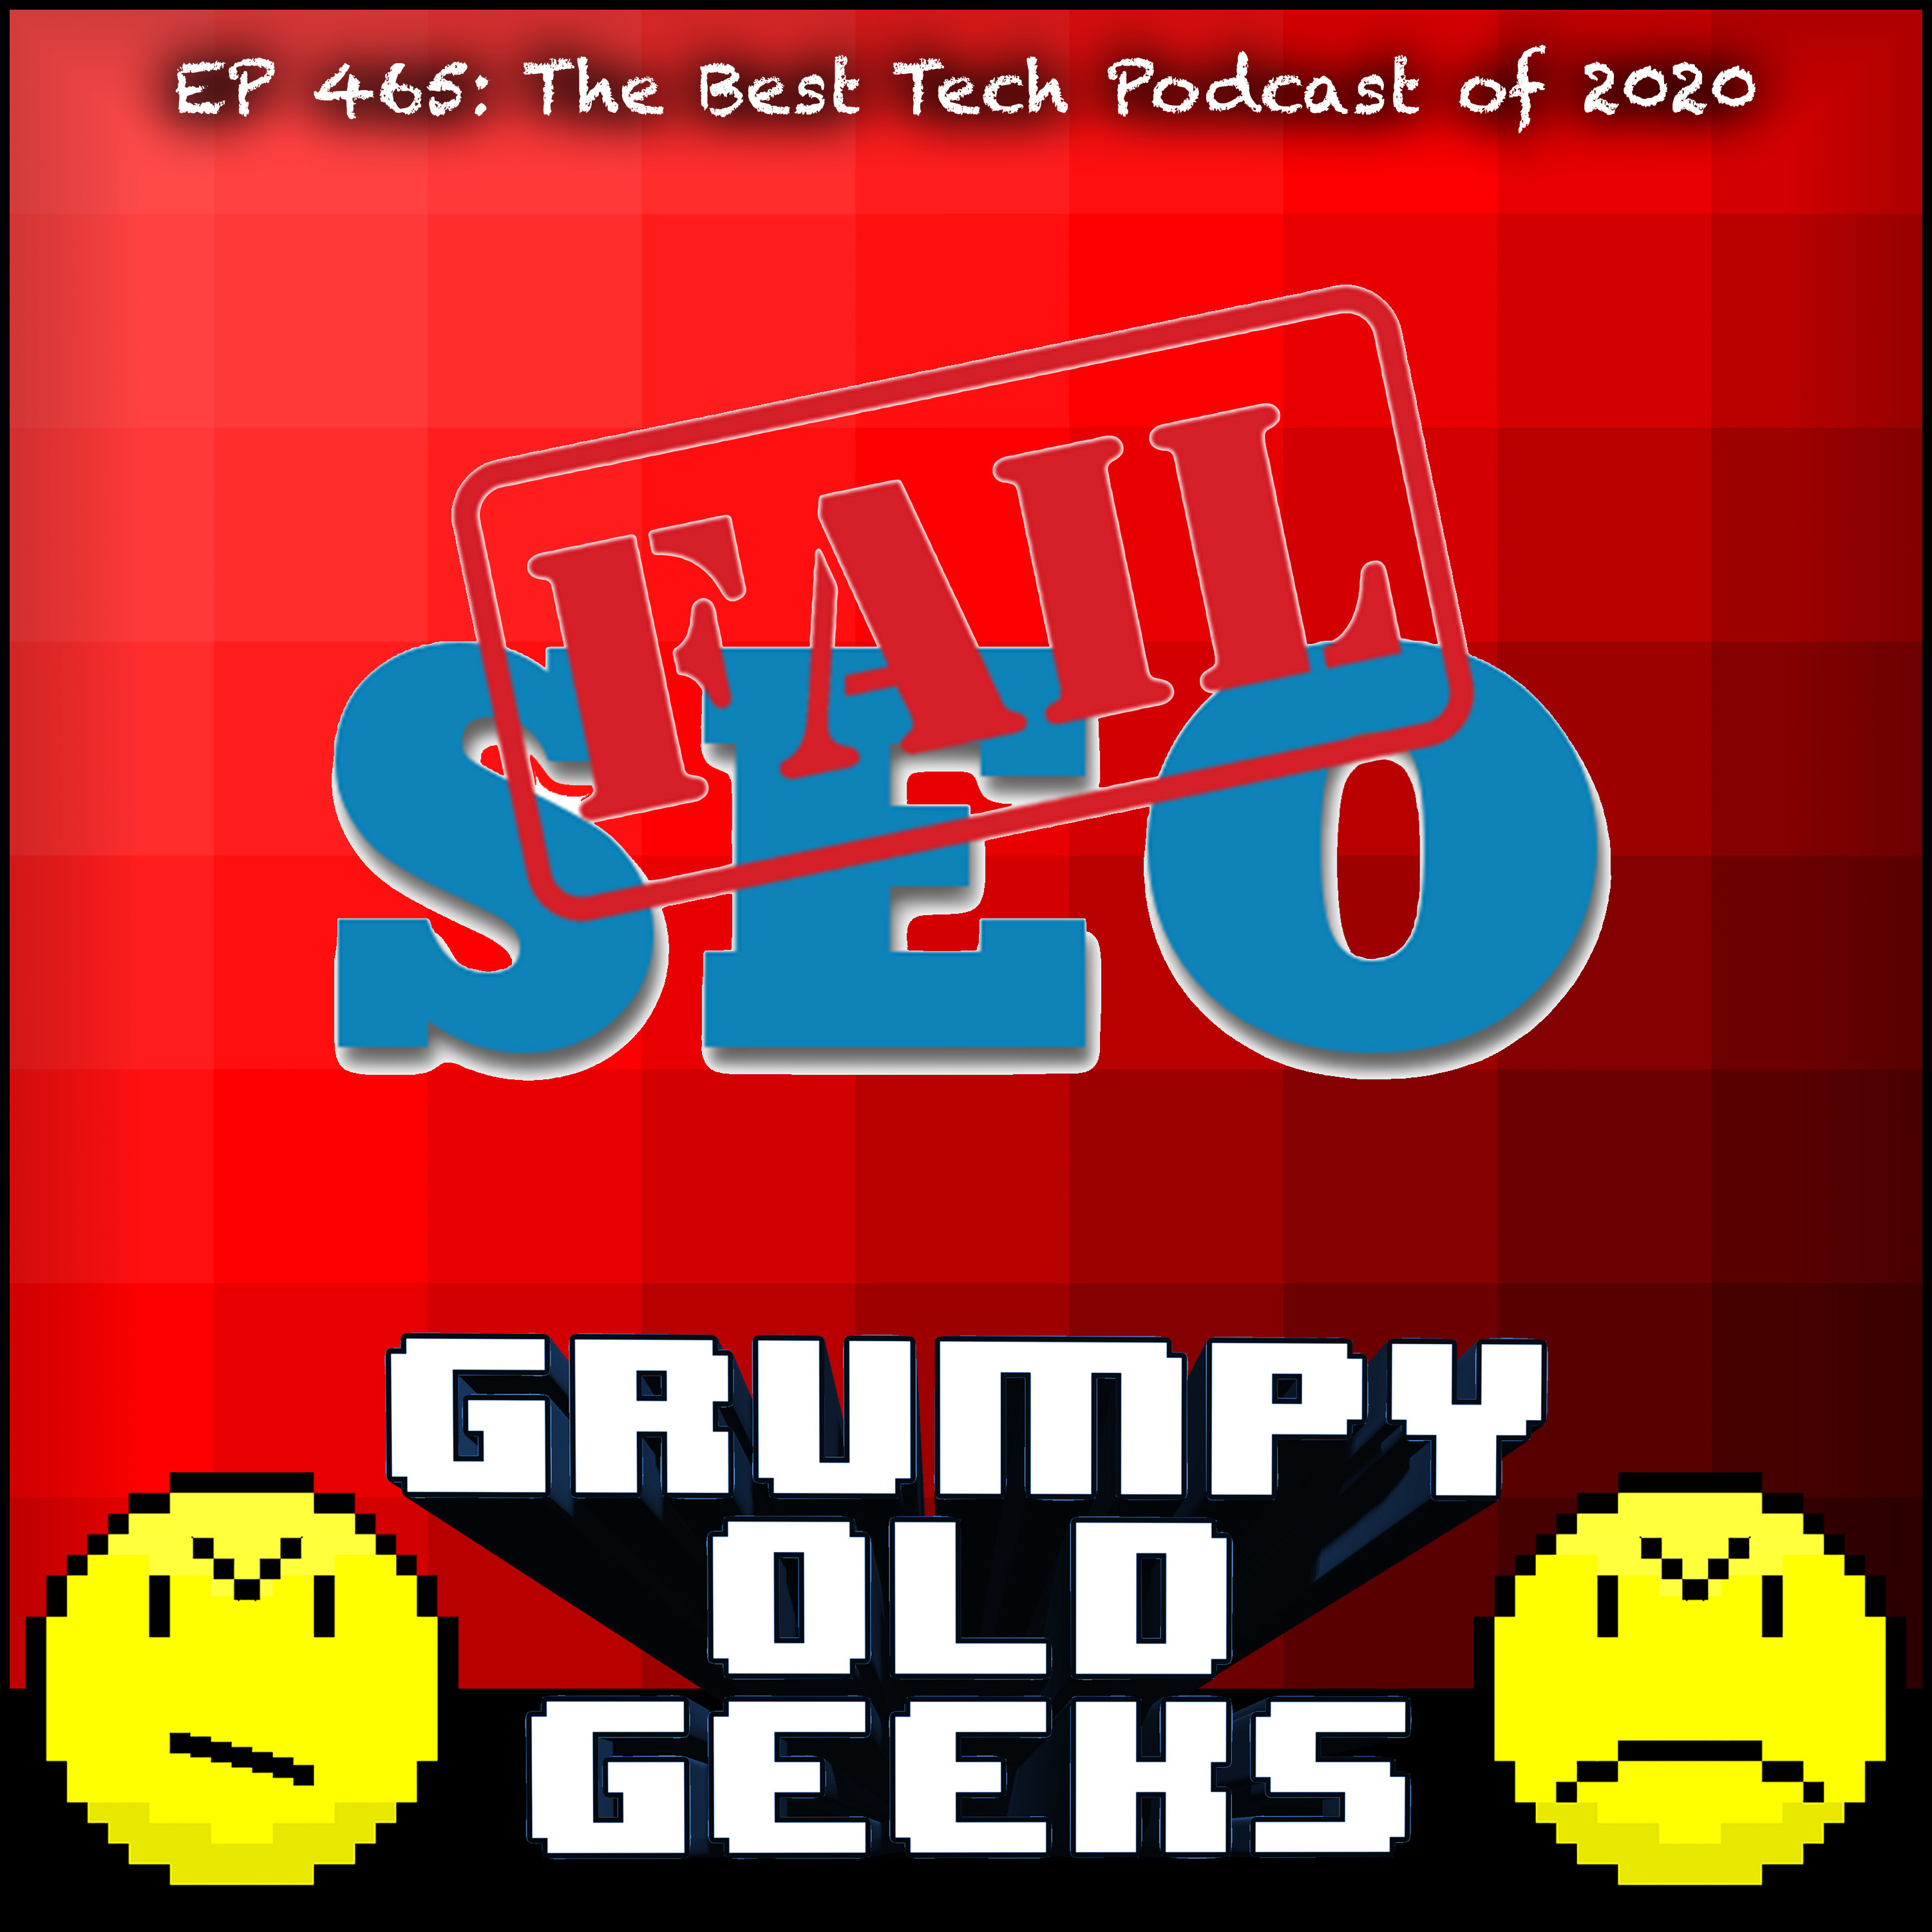 465: The Best Tech Podcast of 2020 Image